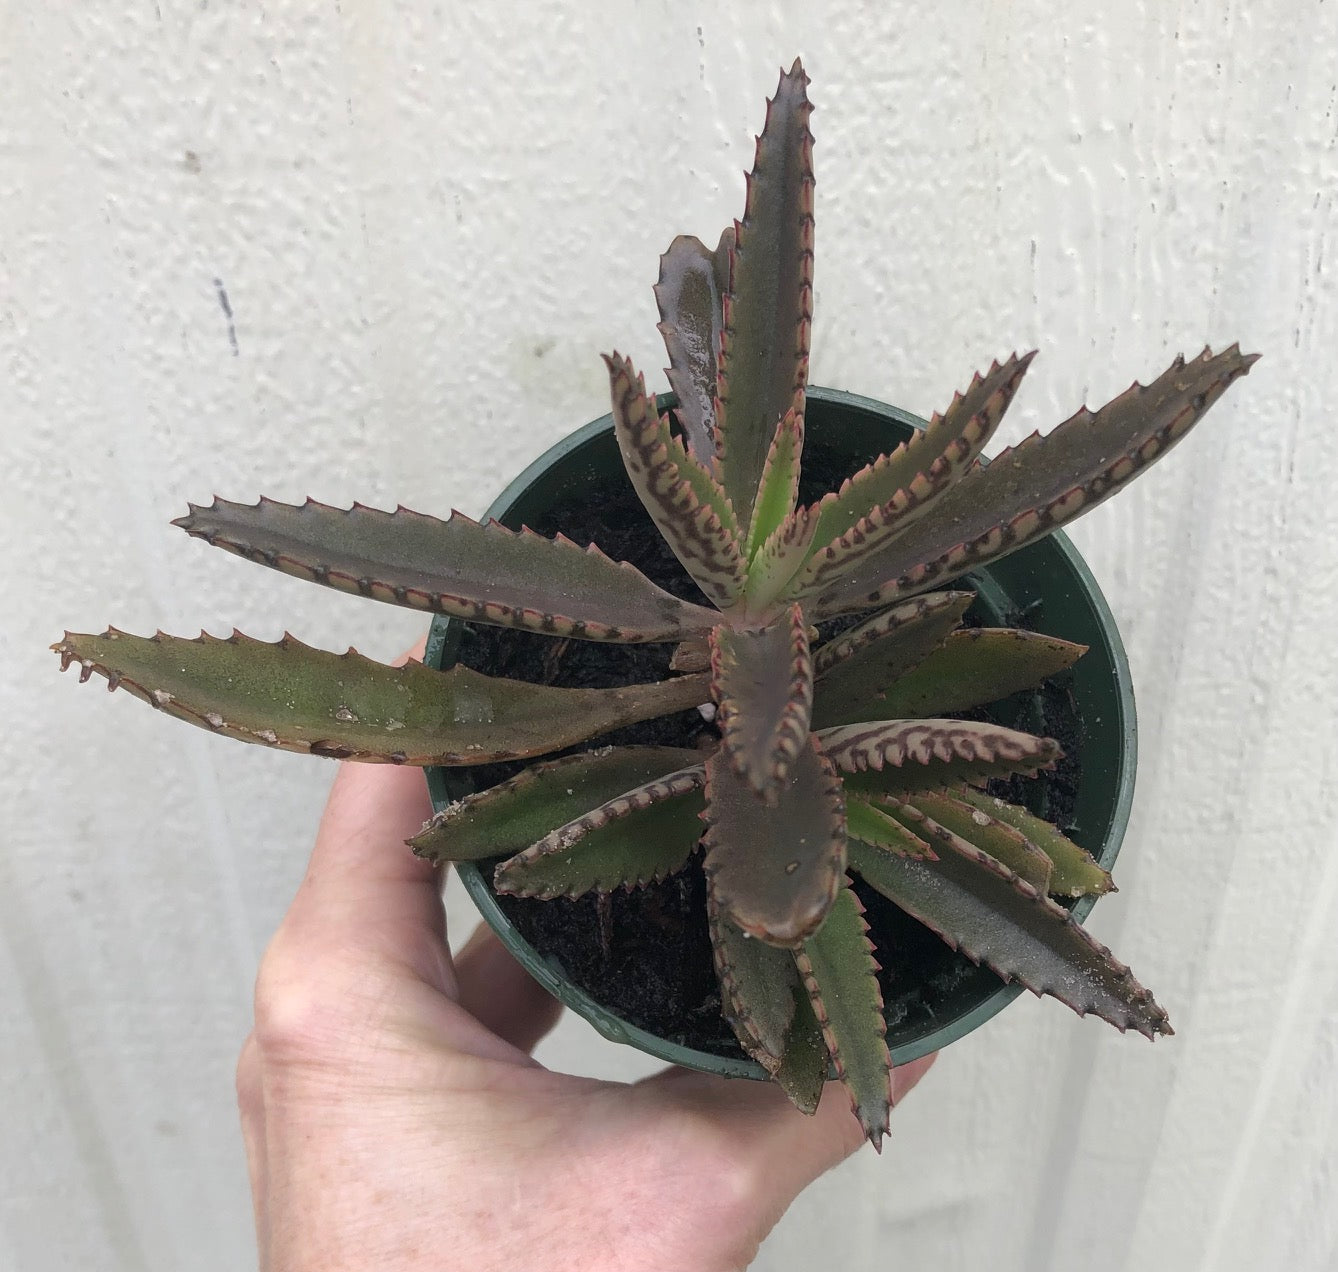 Kalanchoe Daigremontiana, Mother of Thousands - 3 inch pot